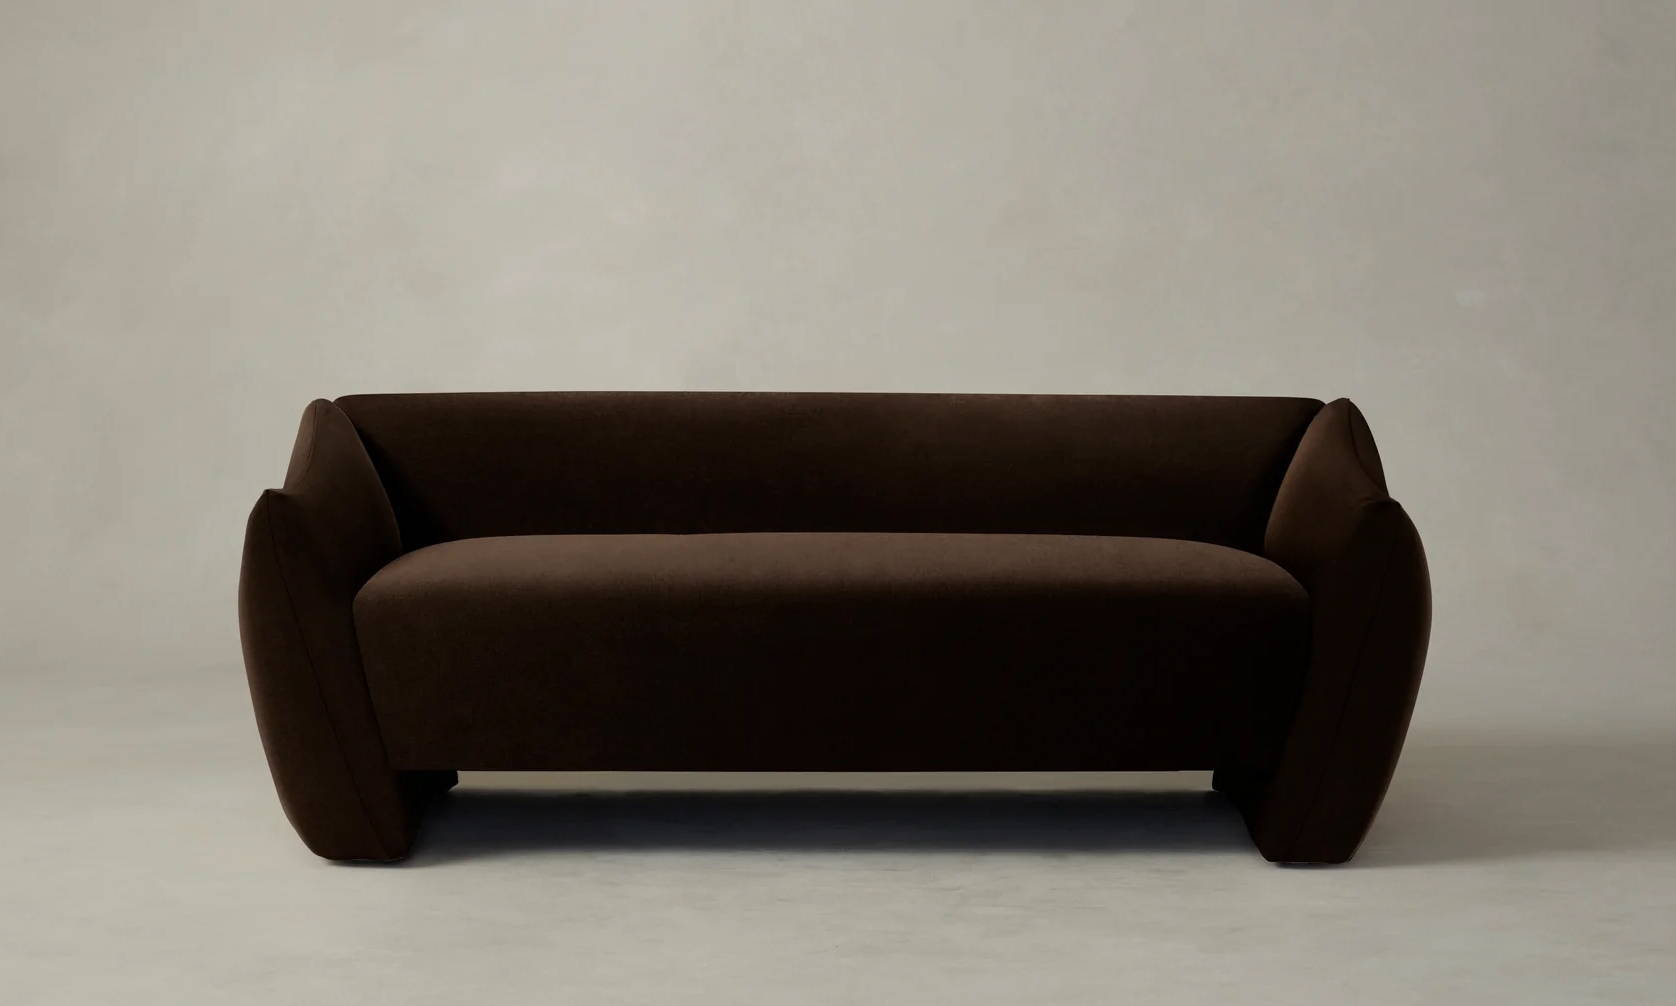 The Bond Settee in Chocolate Mohair